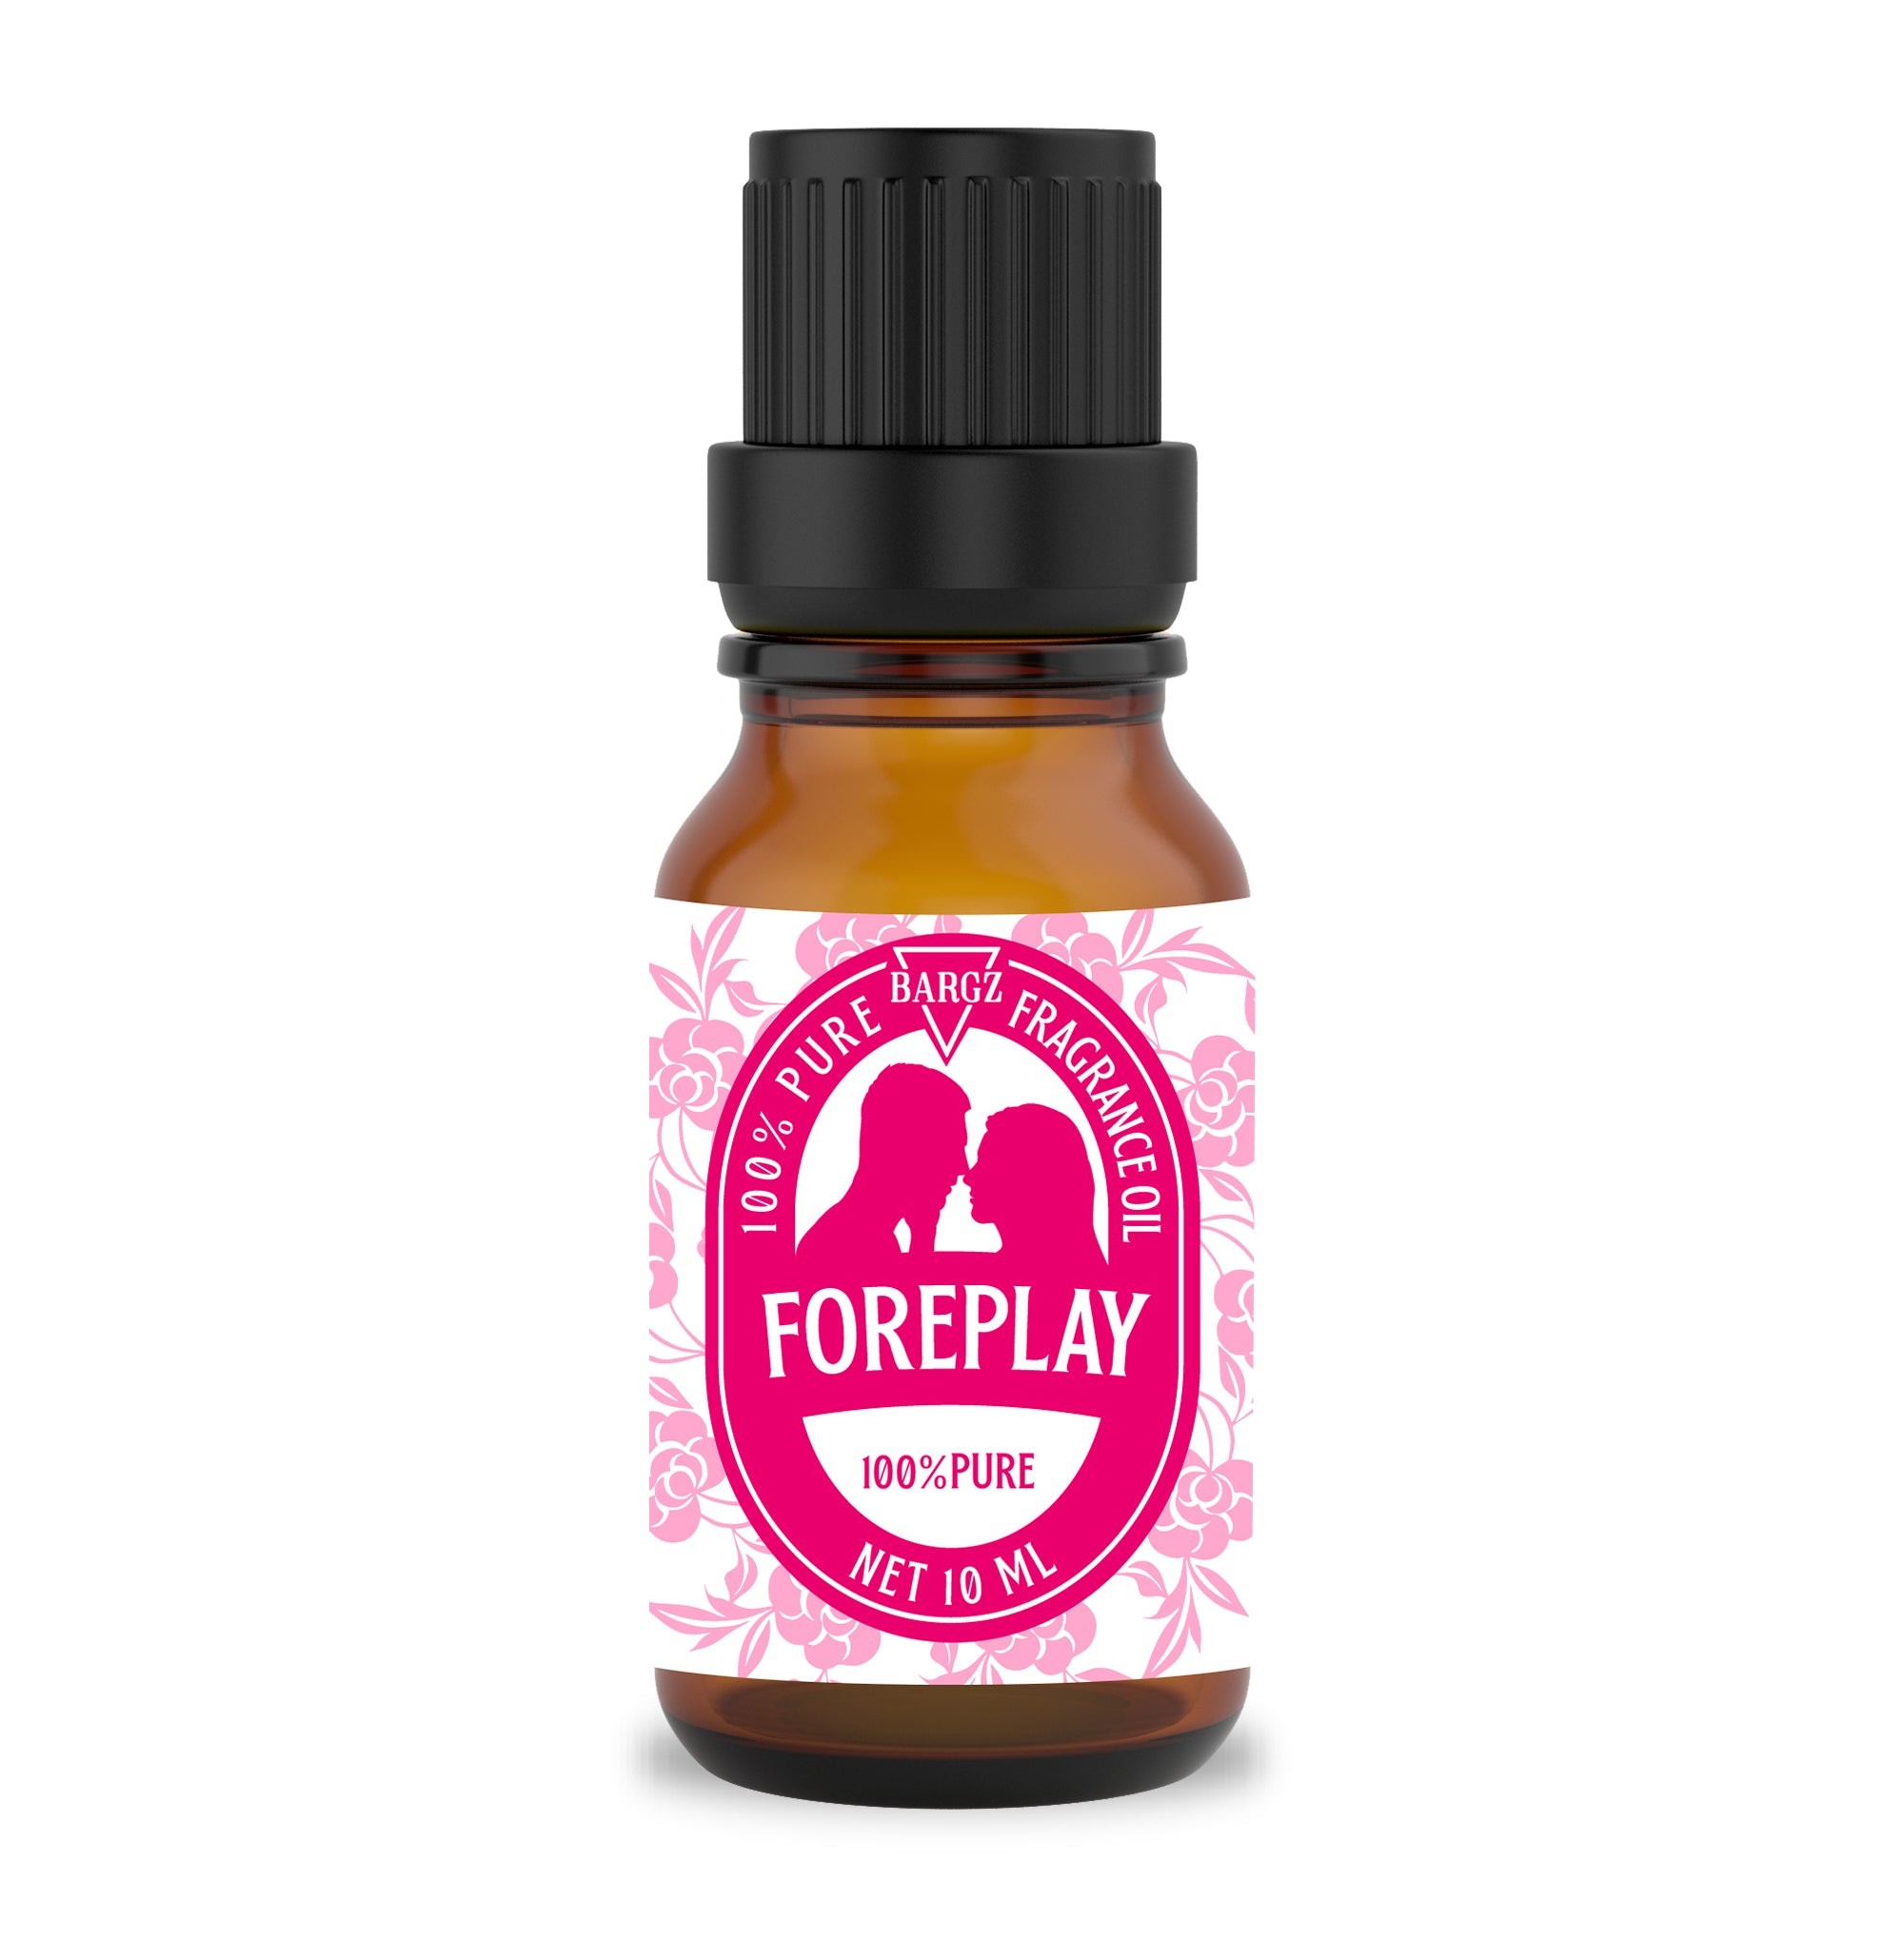 Bargz Foreplay Fragrance Oil